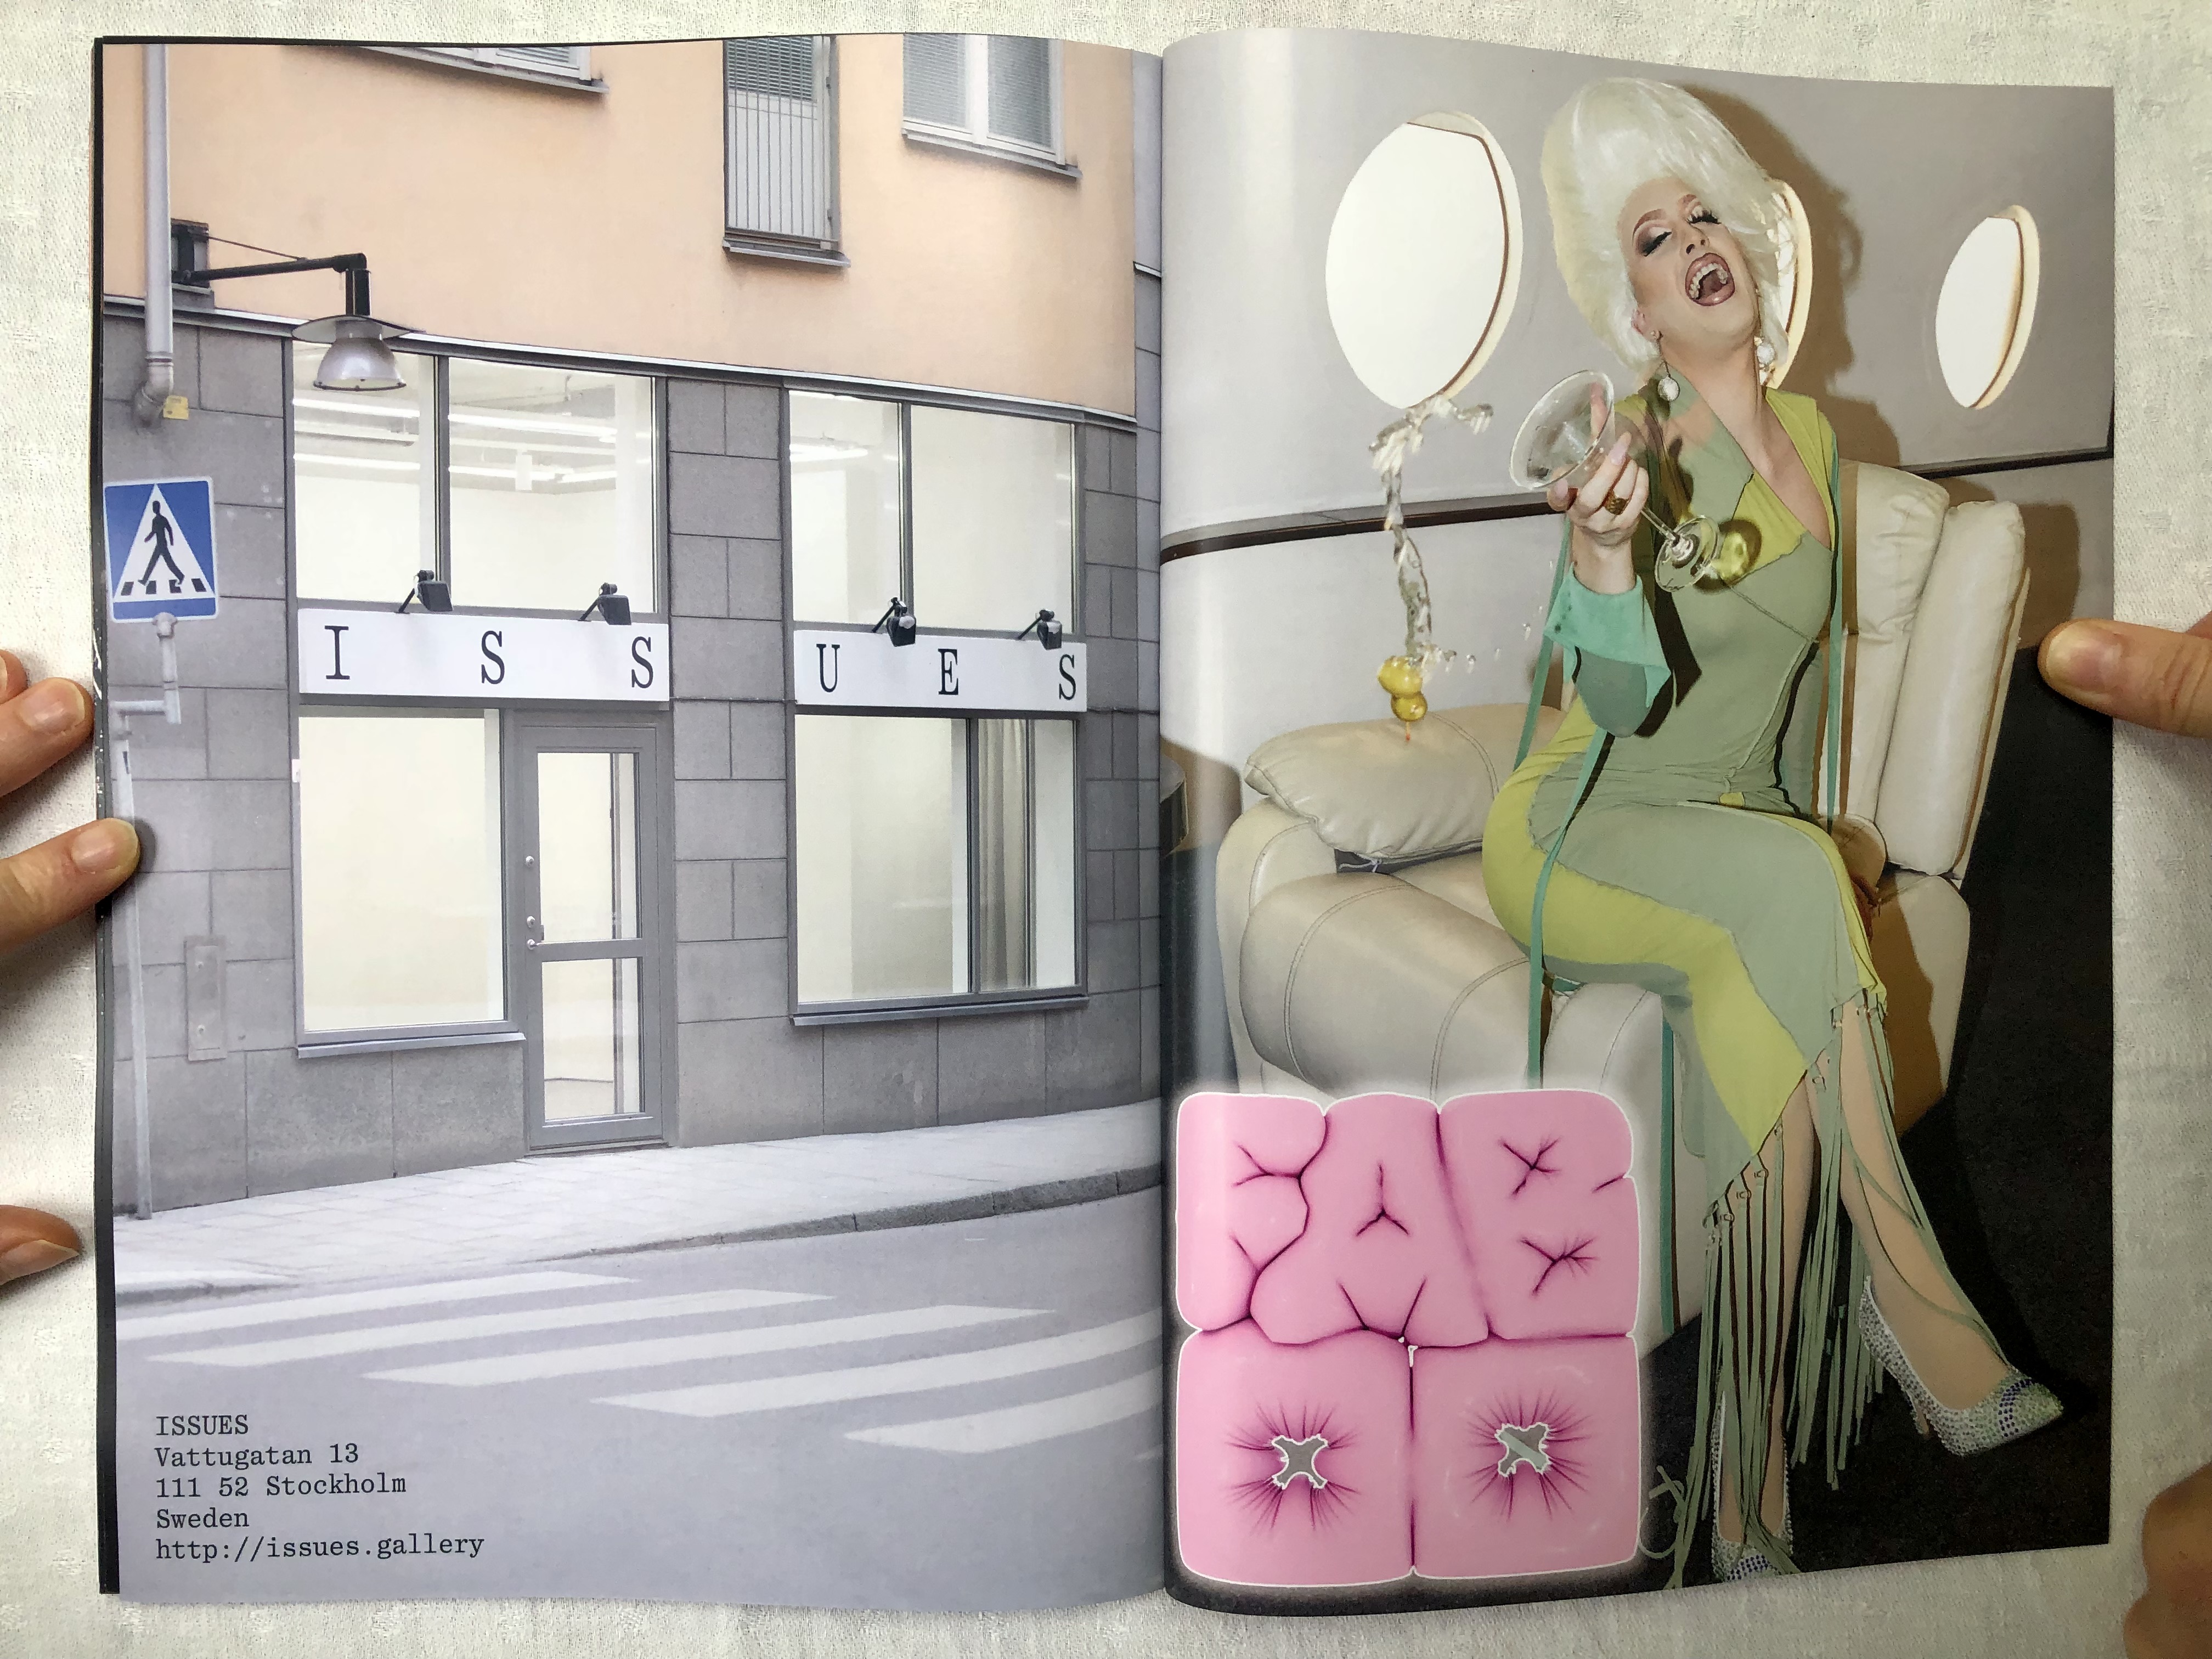 Magazine spread against a gray background. The left page shows a photo of the exterior of Issues Gallery in Stockholm. The right page shows Jesse in campy drag laughing with a martini glass on a private jet.